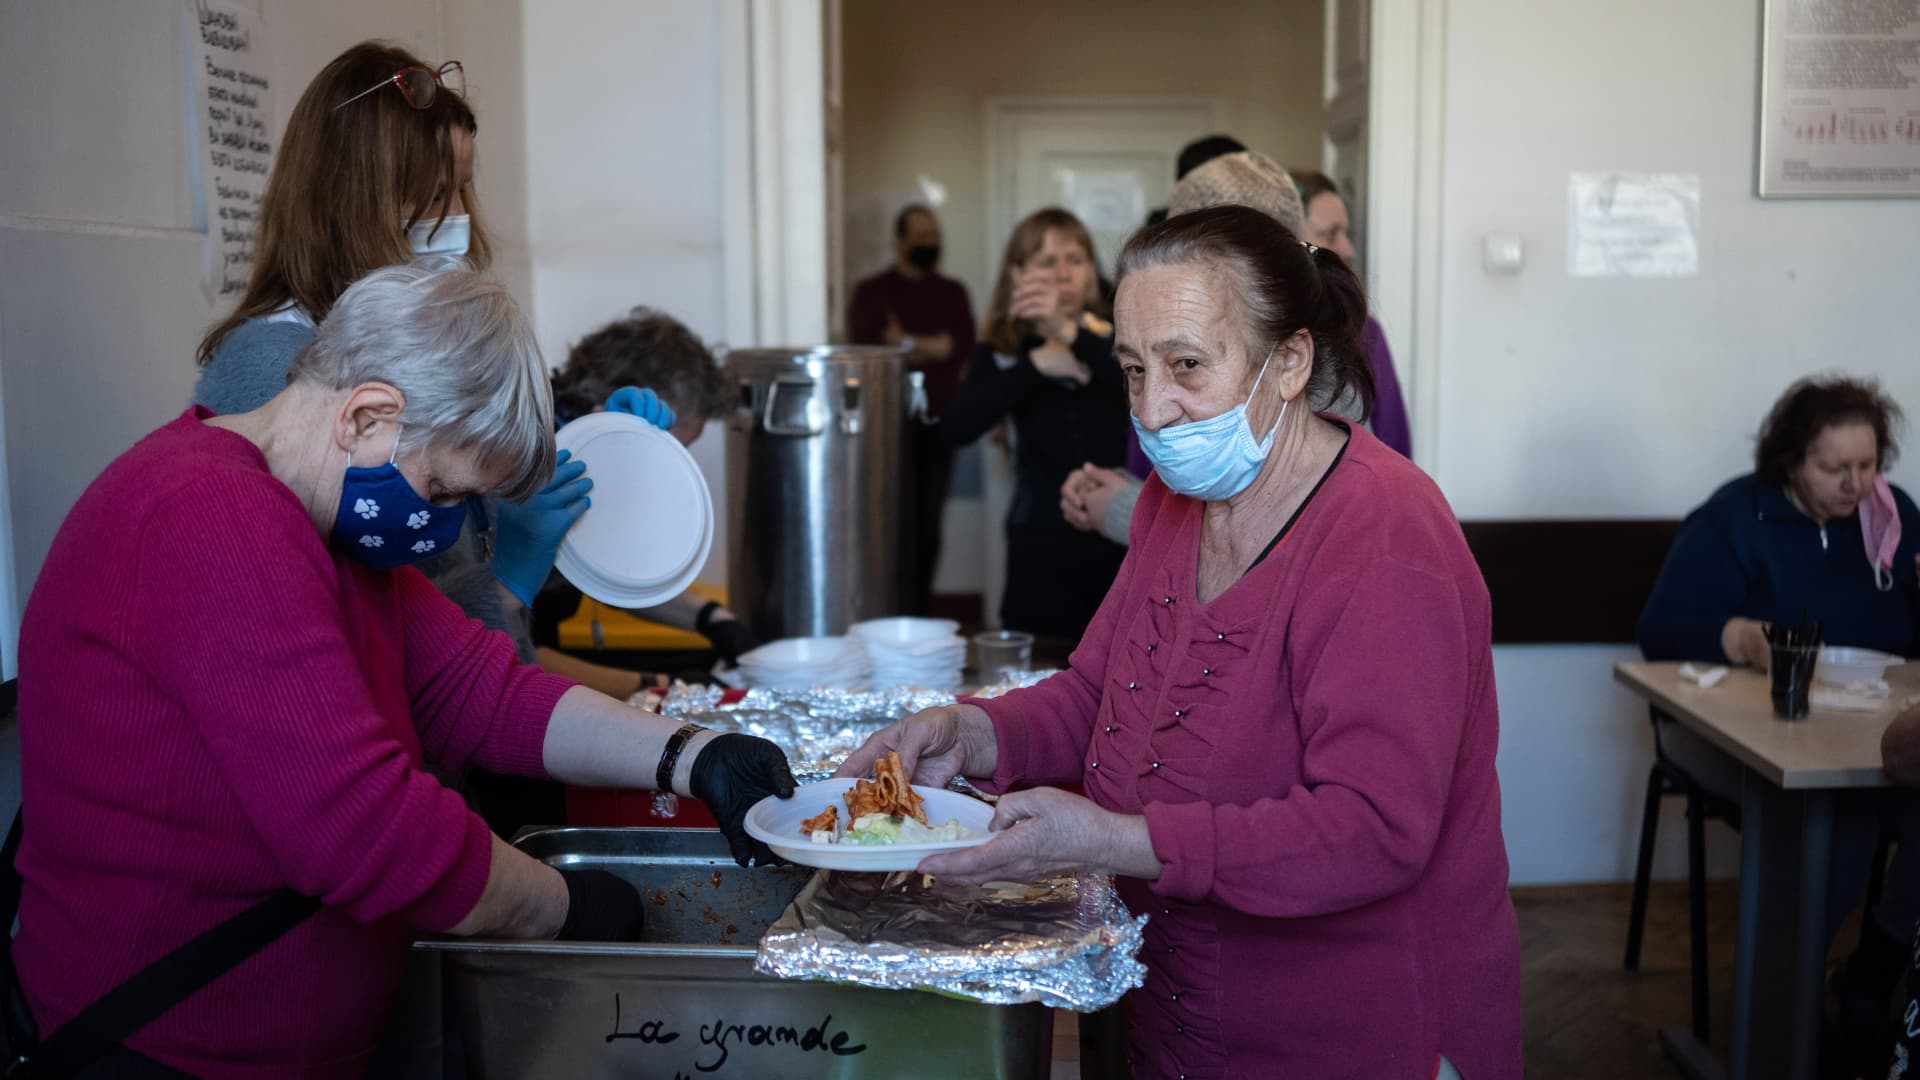 Lunch is served in a dining room of a former hospital building operating as a temporary shelter for displaced Ukrainians in Krakow, Poland, on Monday, March 14, 2022.